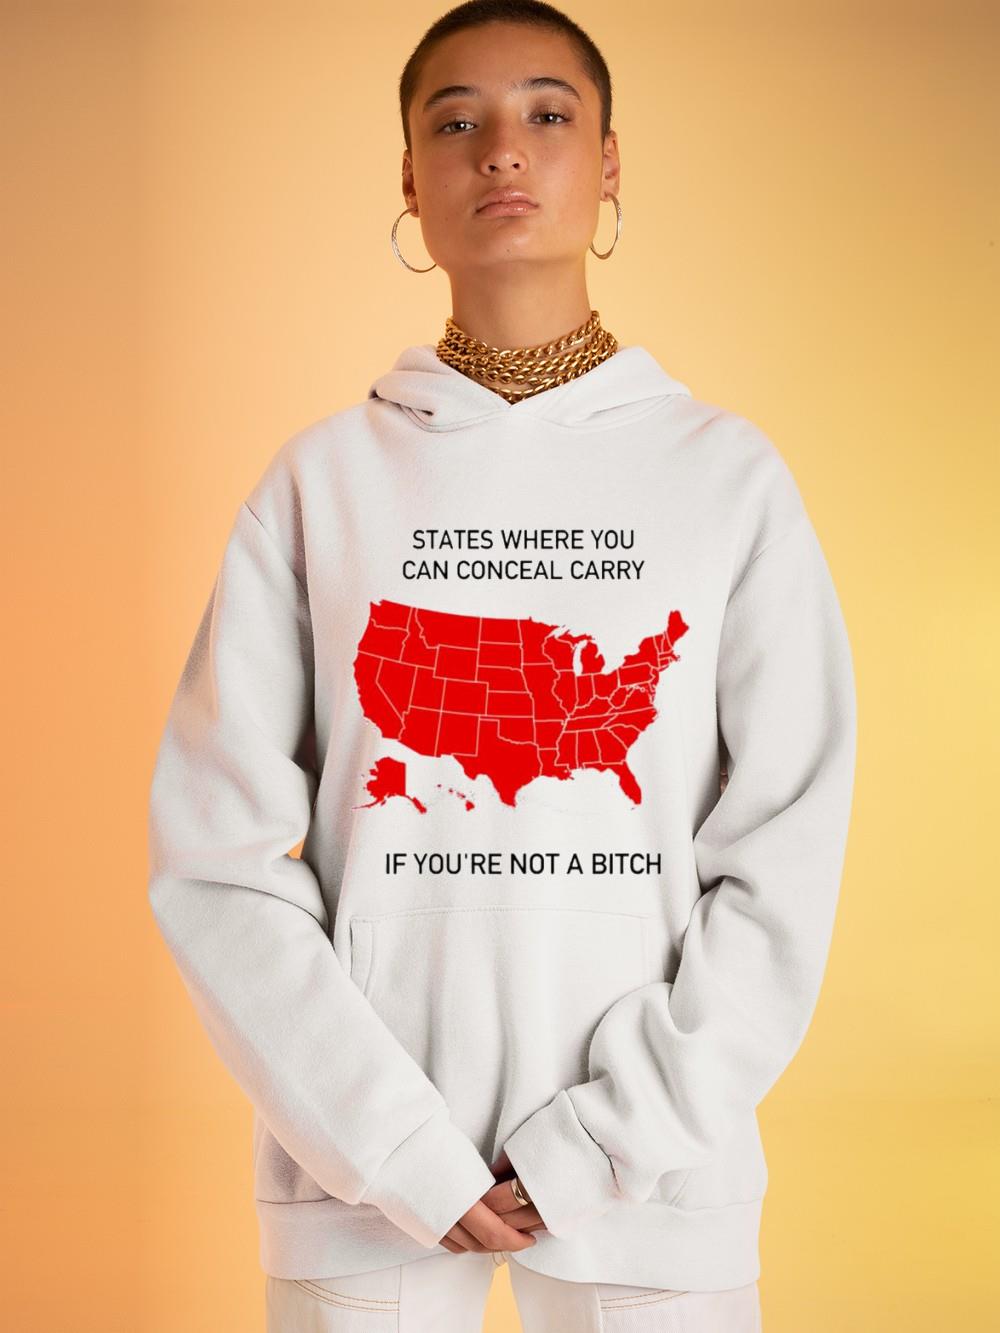 States Where You Can Conceal Carry If You’re Not A Bitch Shirt